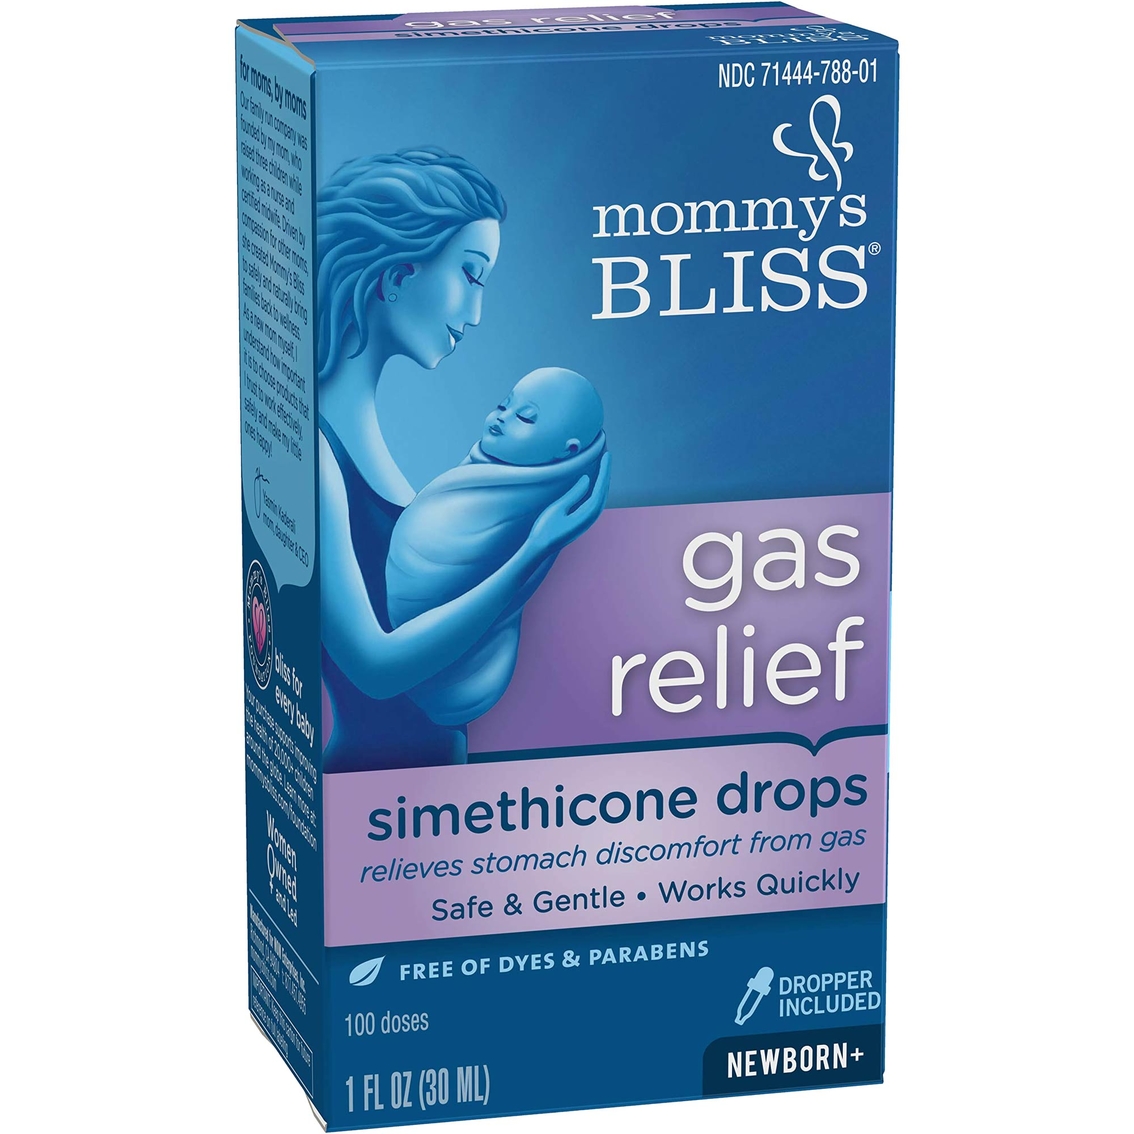 Mommy's Bliss Gas Relief Drops - Image 2 of 2